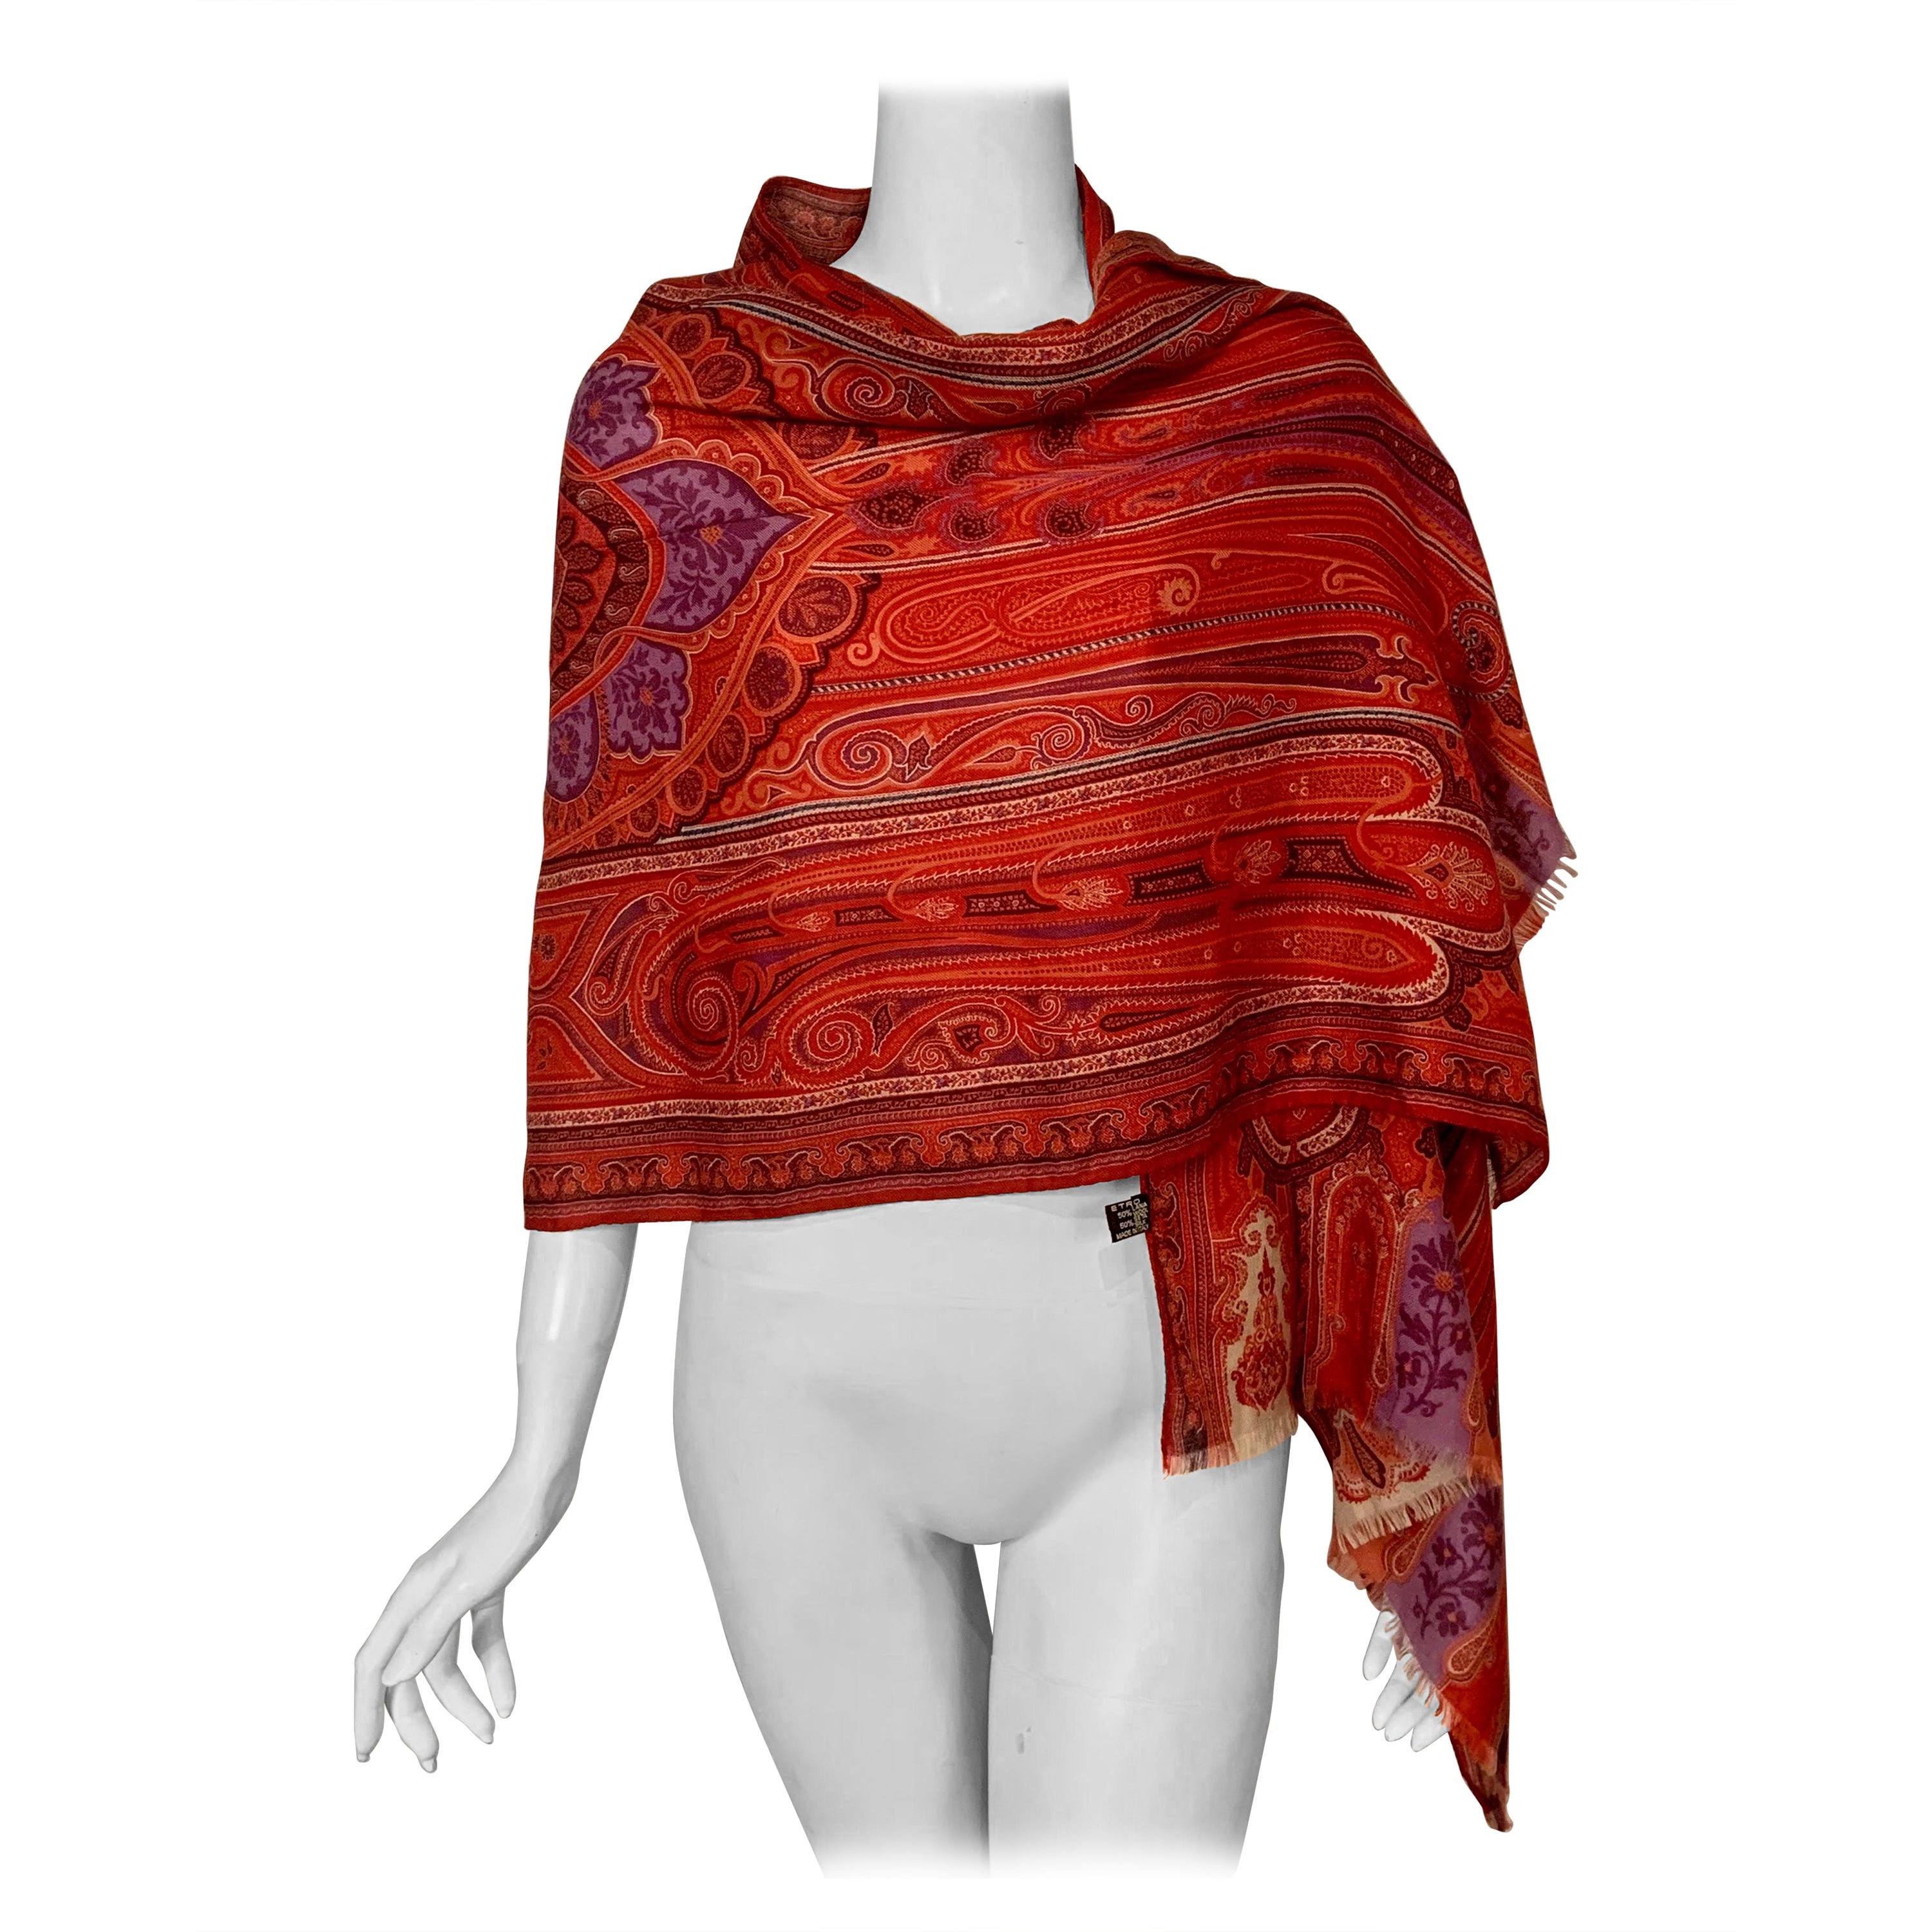 Etro Classic Red Wool and Silk Paisley Scarf with Lavender Center